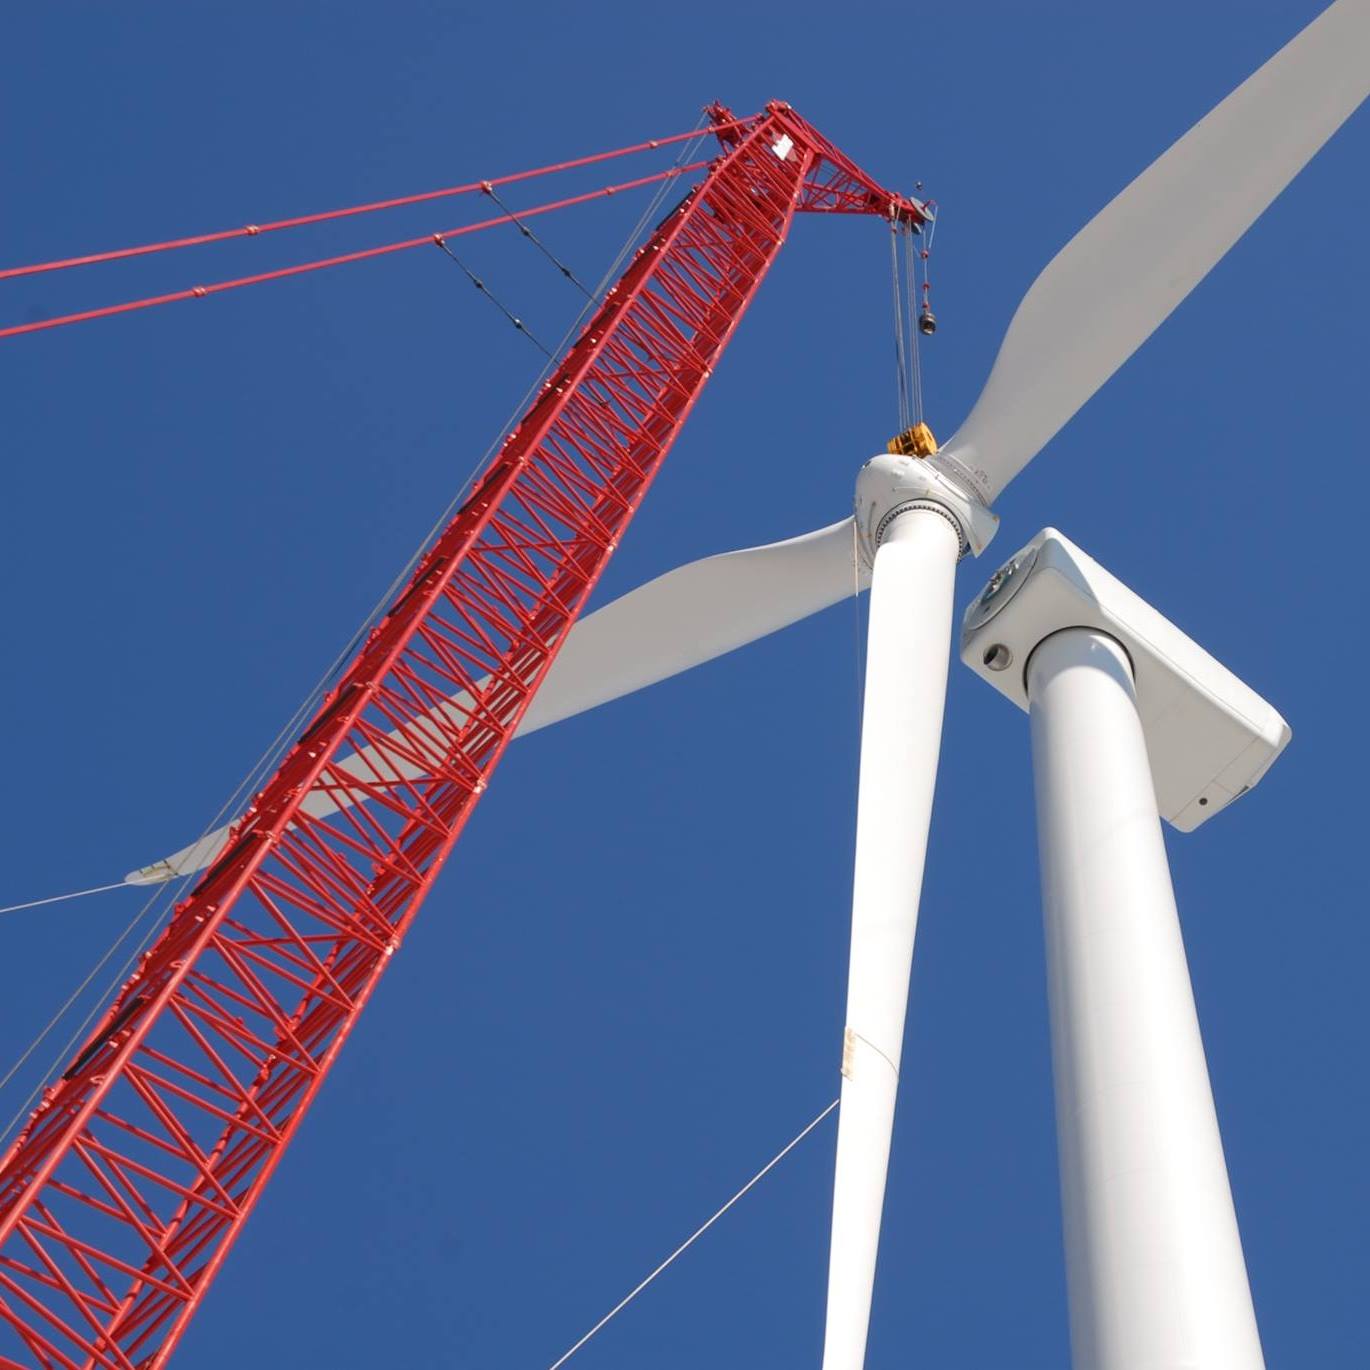 A crane and construction of a wind turbine